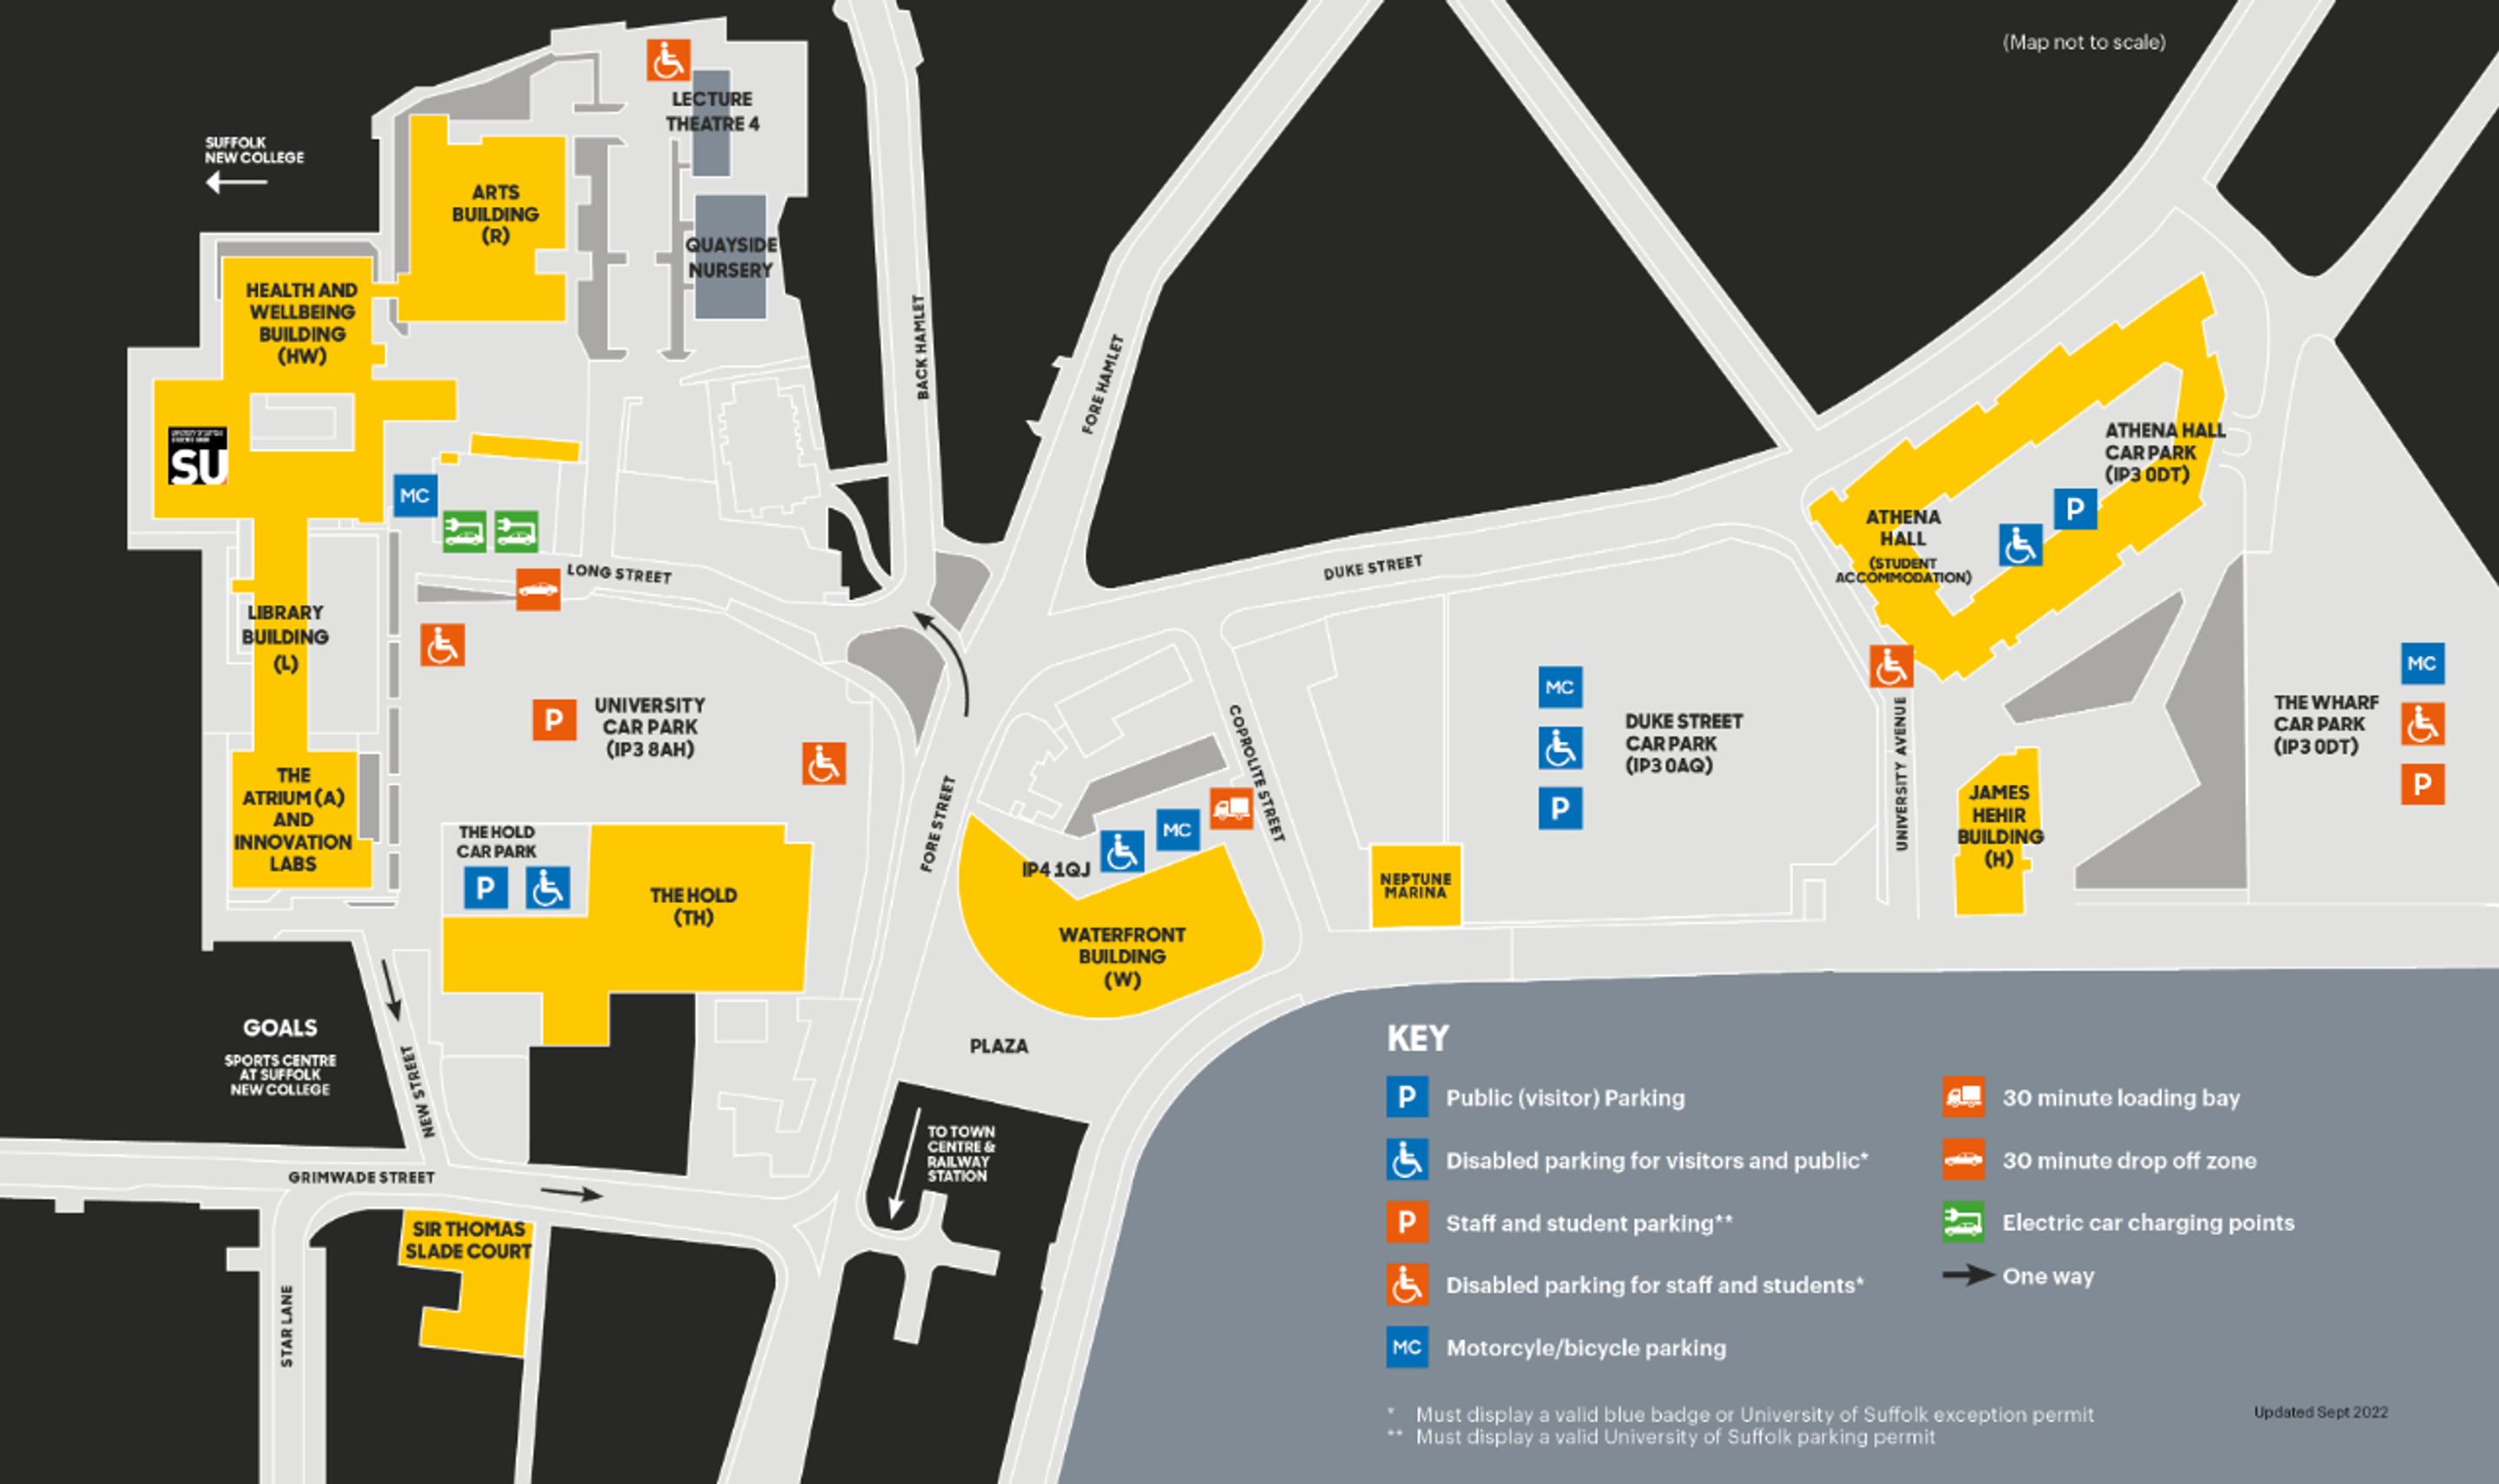 A map of the Ipswich campus